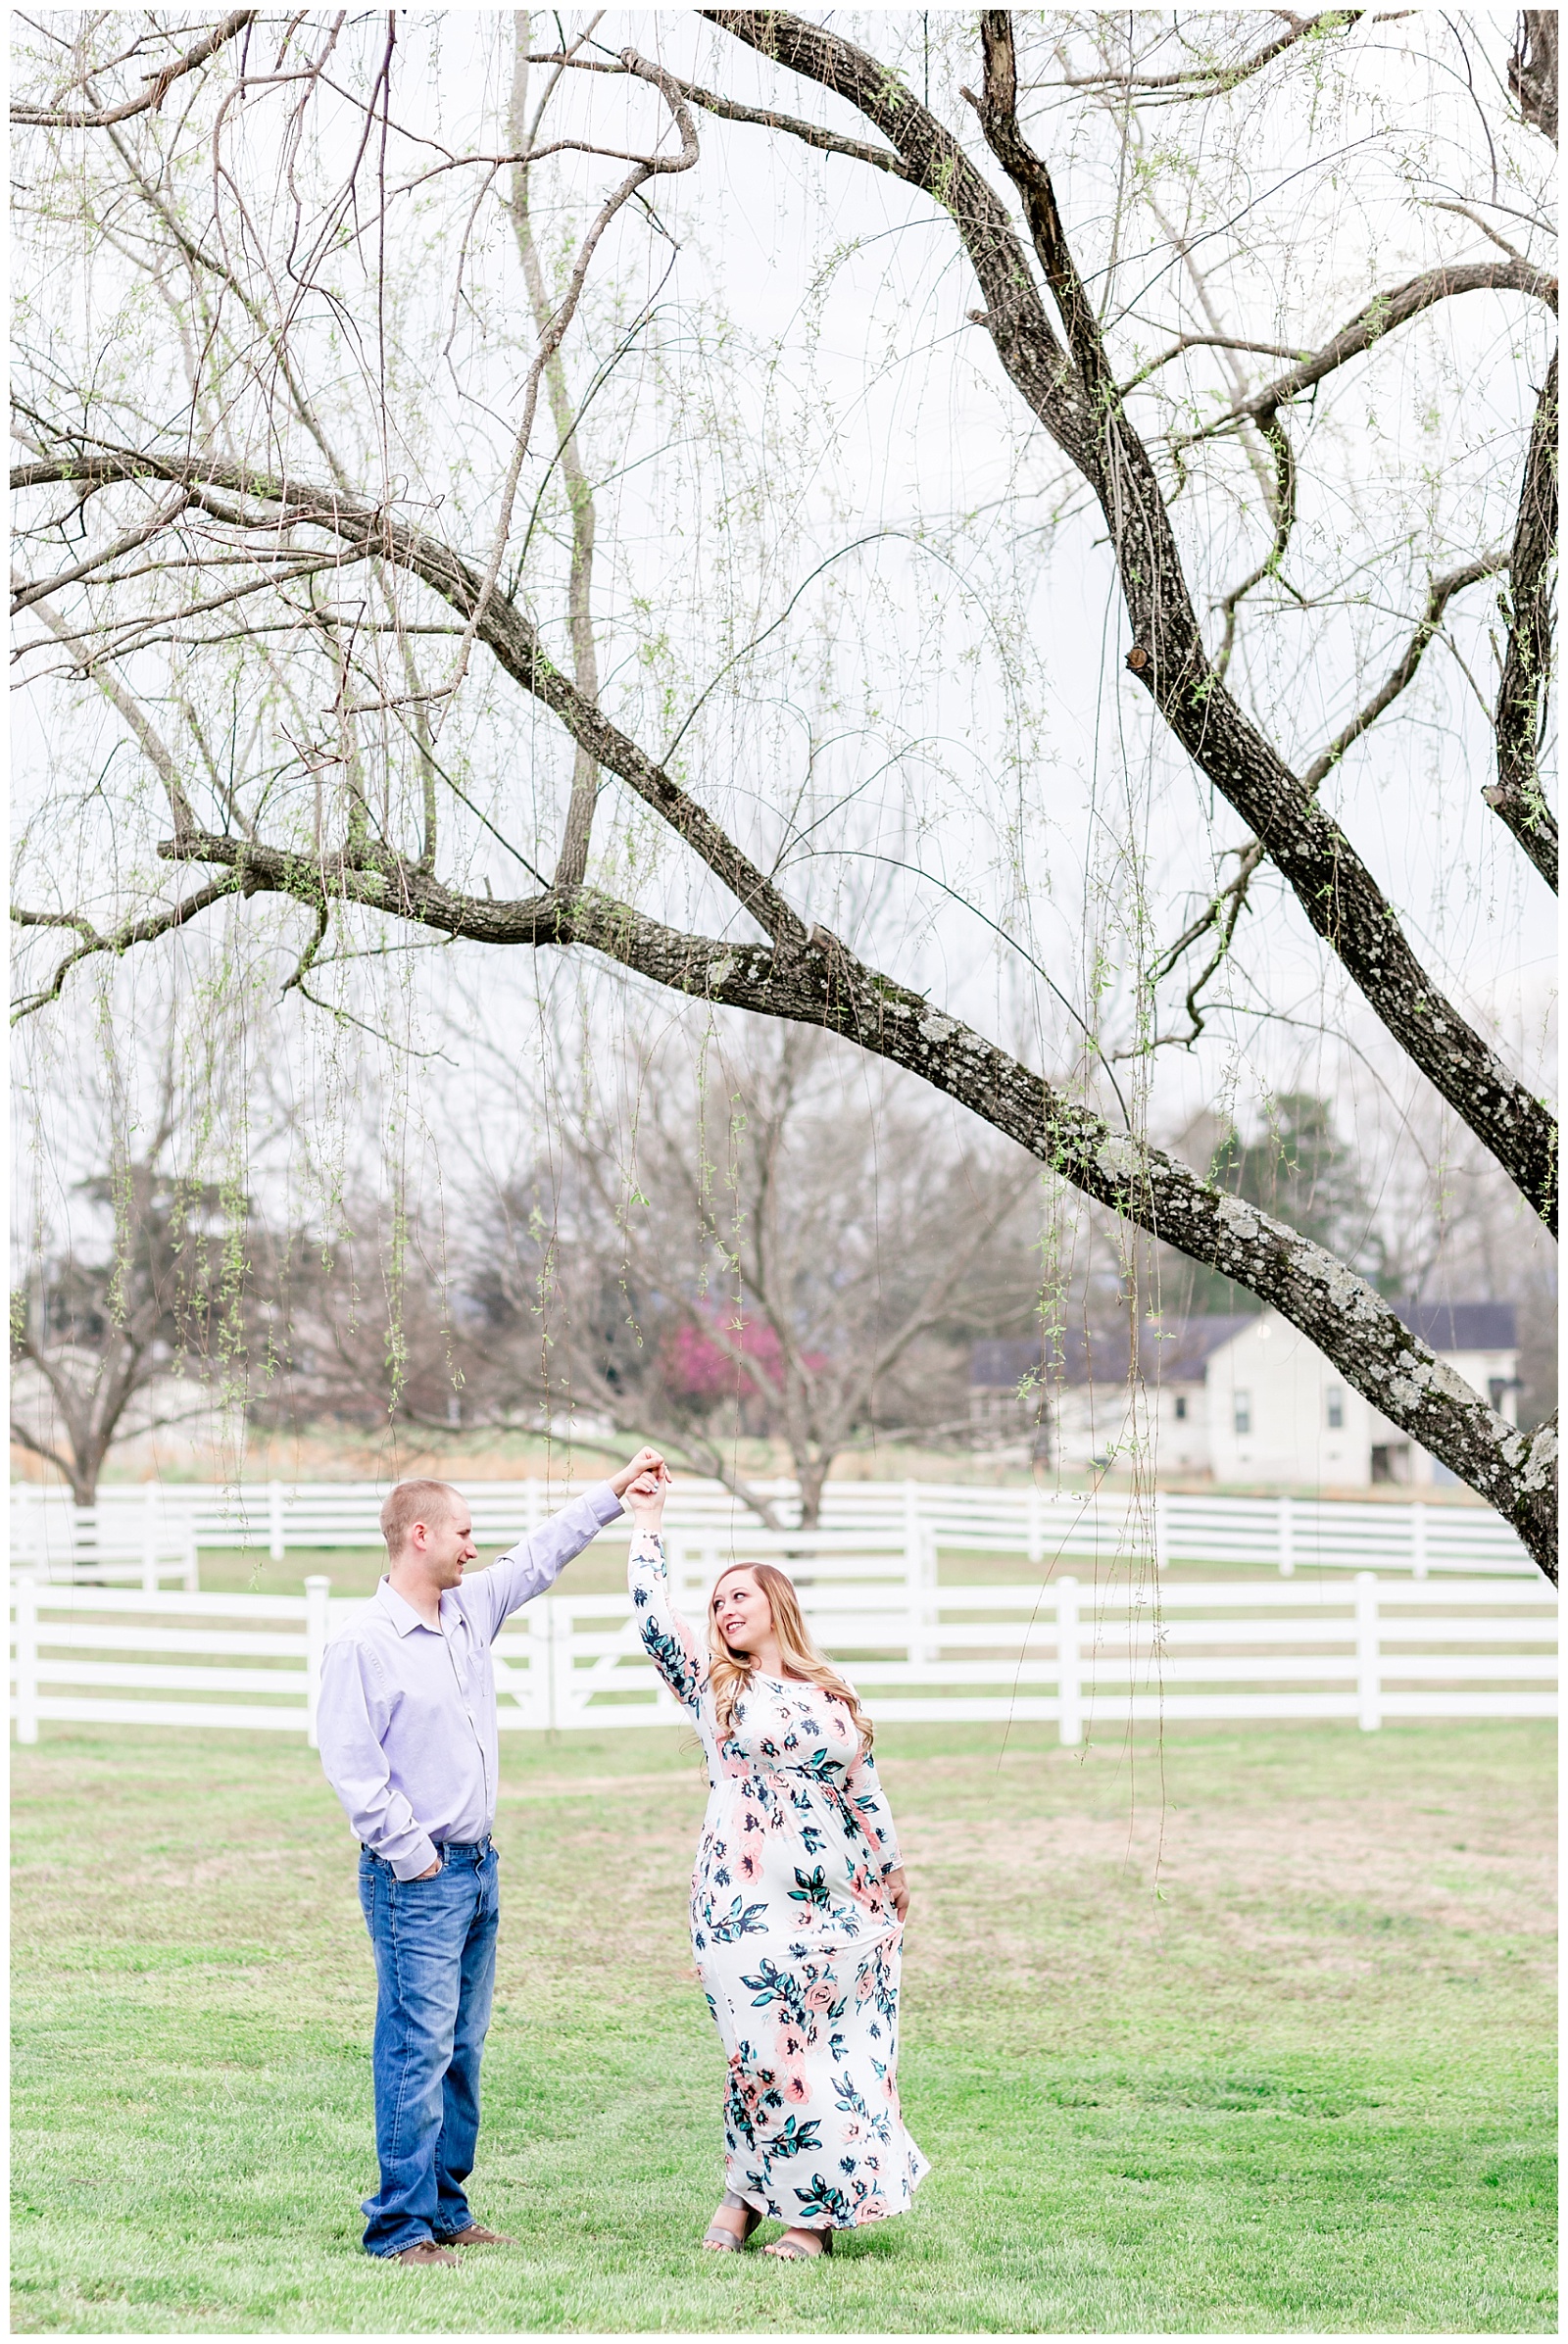 Southern Farm Engagement Session with Pastel and Floral Outfits under a Weeping Willow